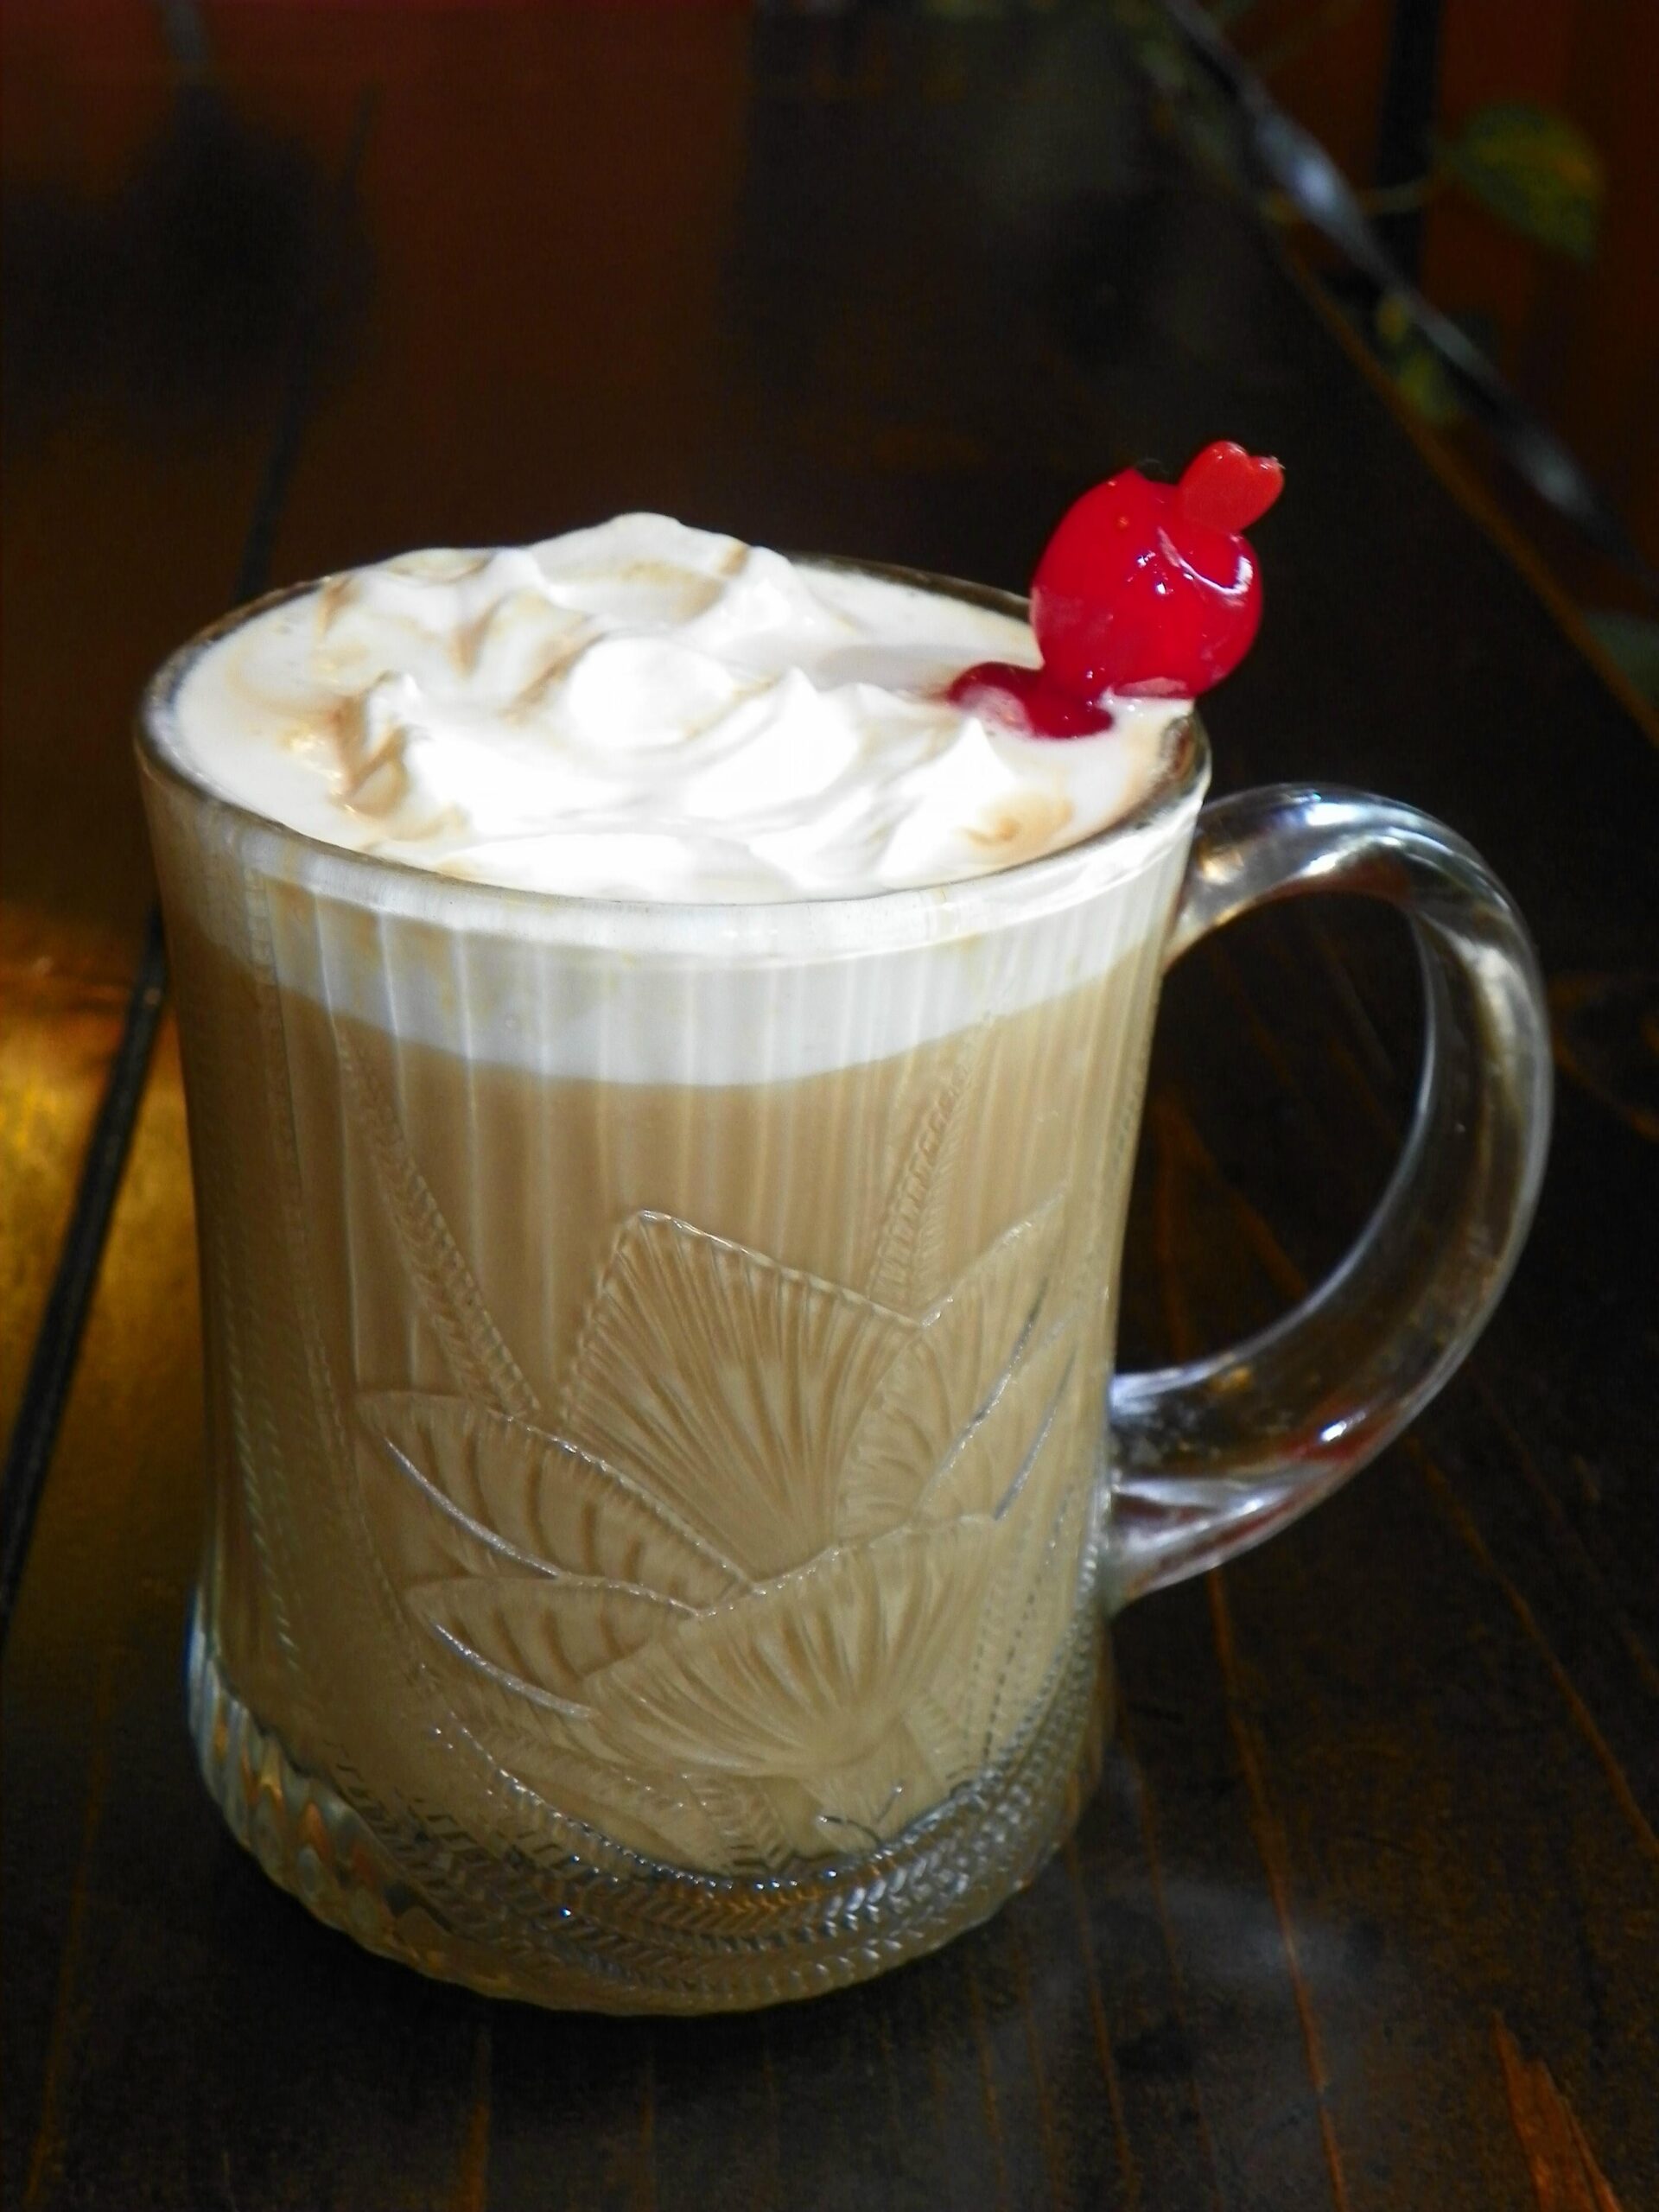  Satisfy your sweet tooth with Swiss White Chocolate Coffee!